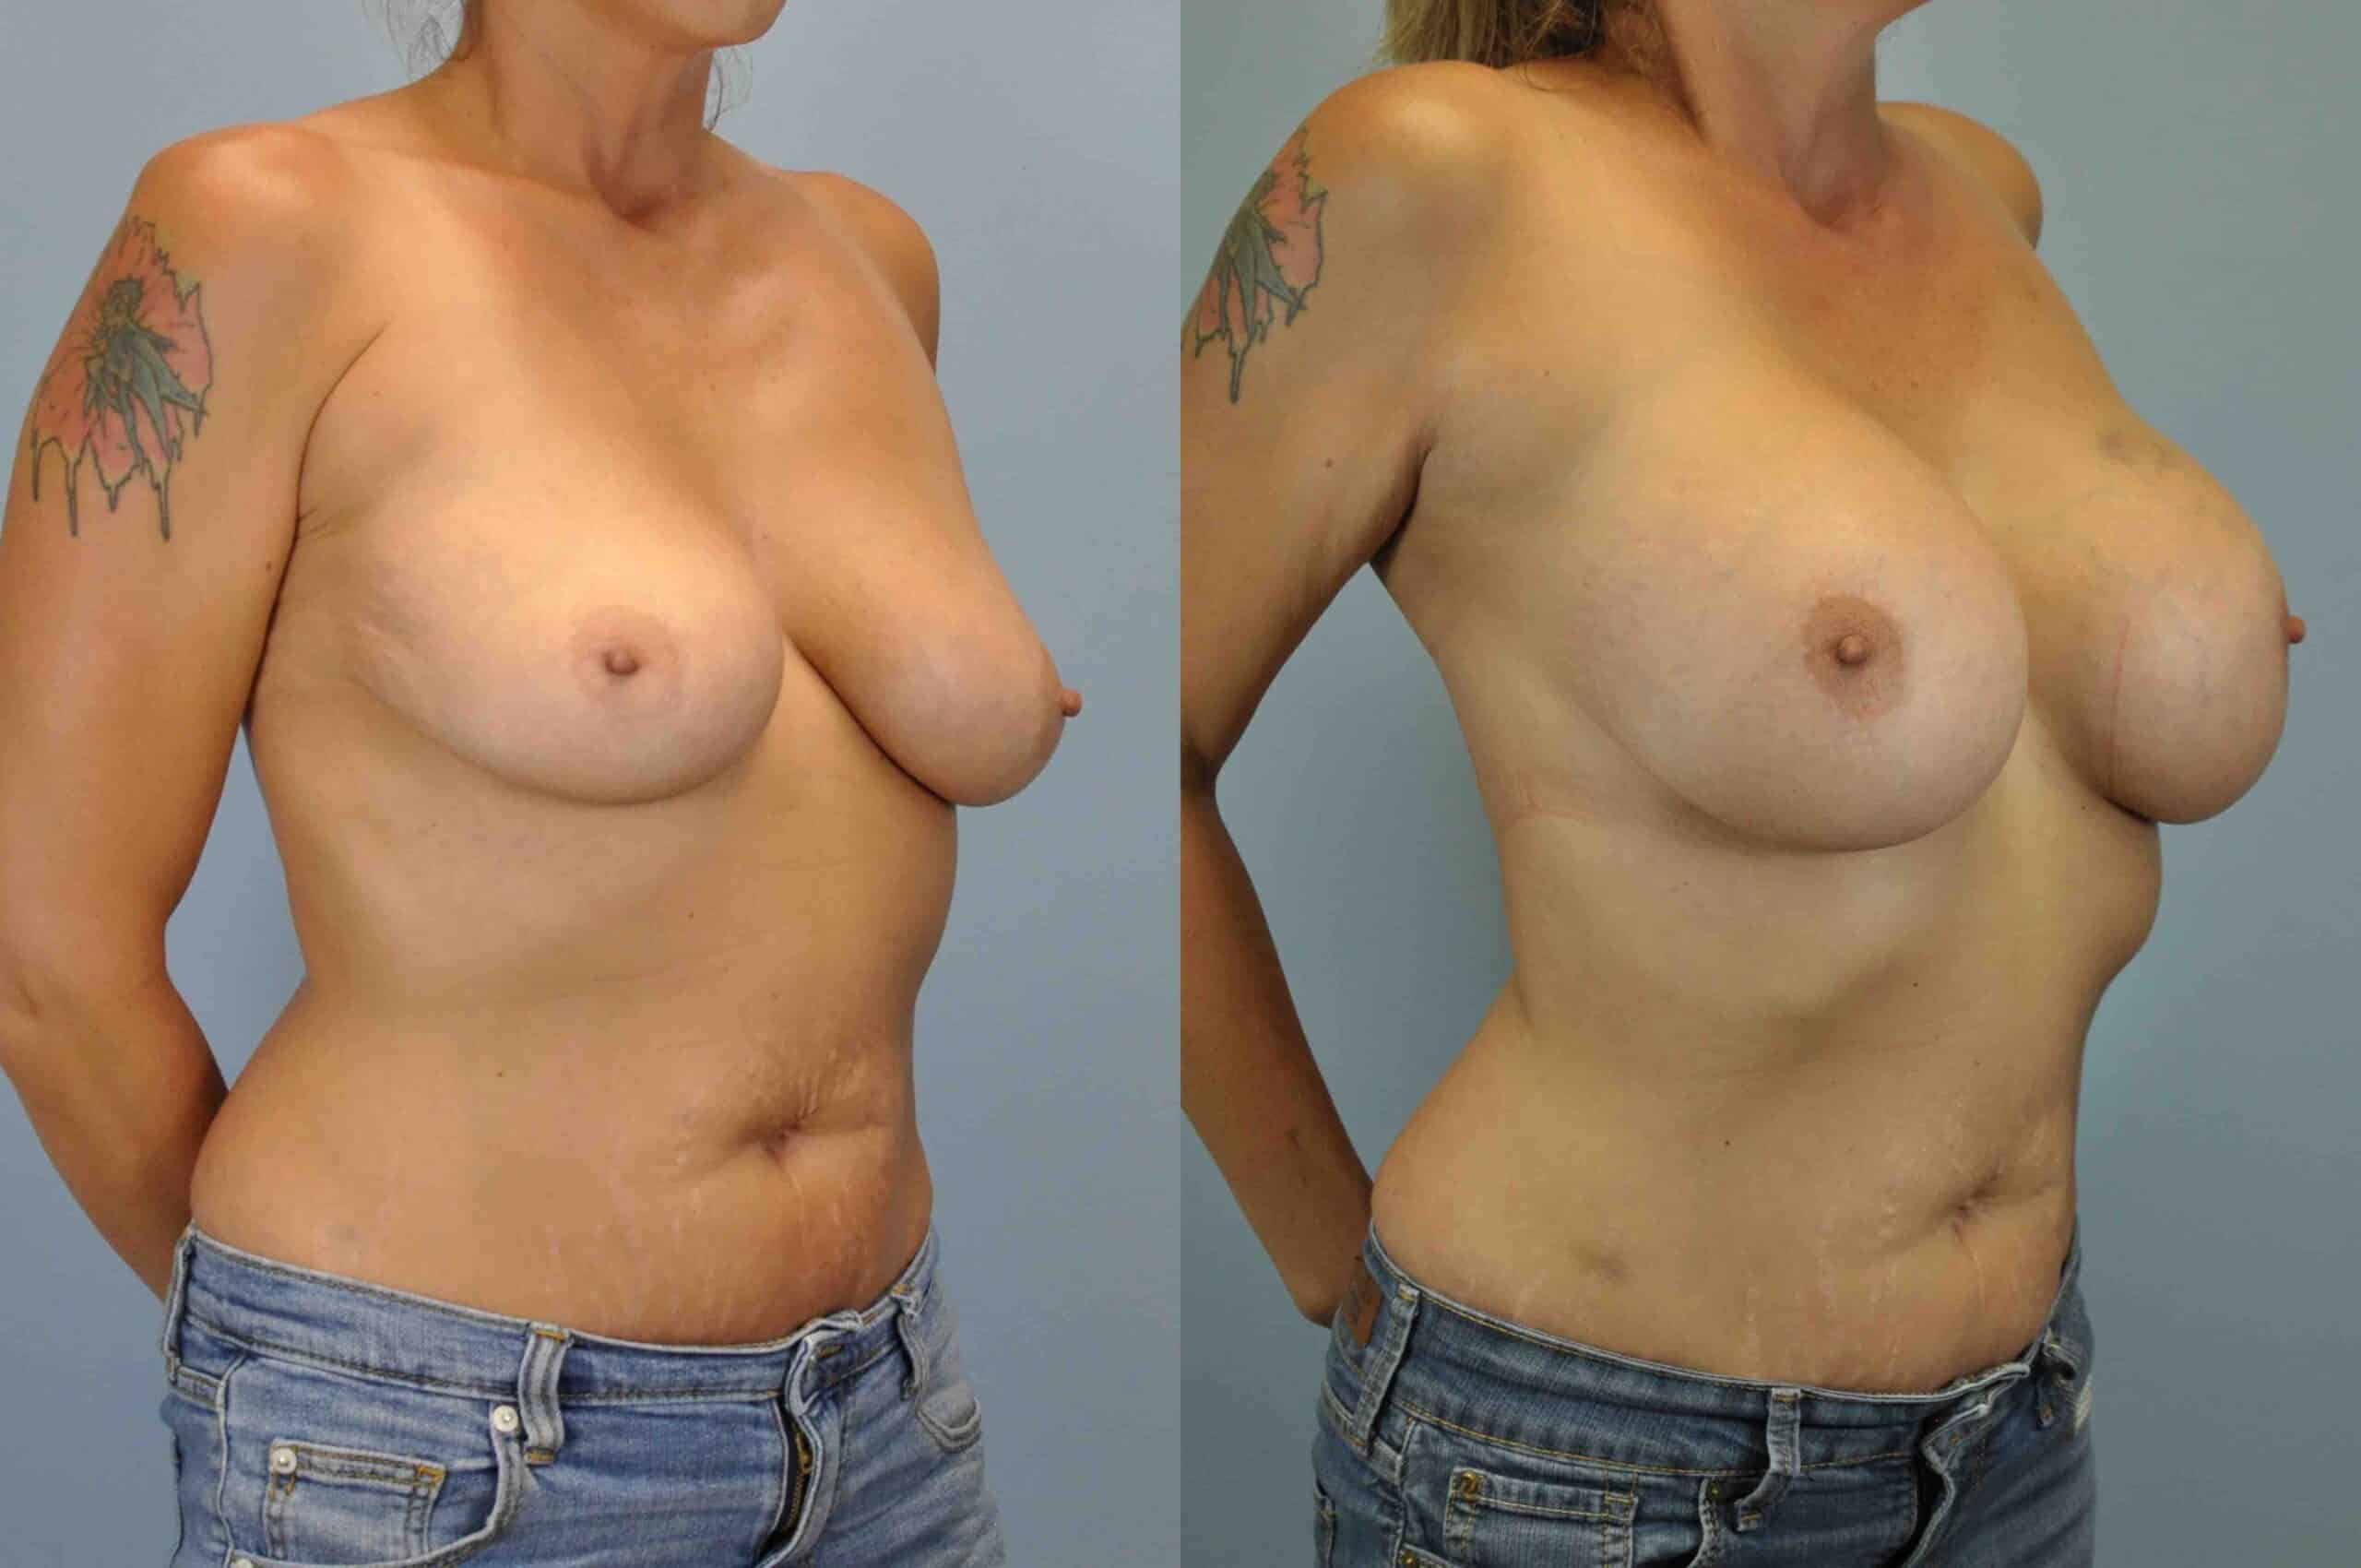 Before and after, patient 2 yr post op from breast augmentation and level III muscle release procedures performed by Dr. Paul Vanek